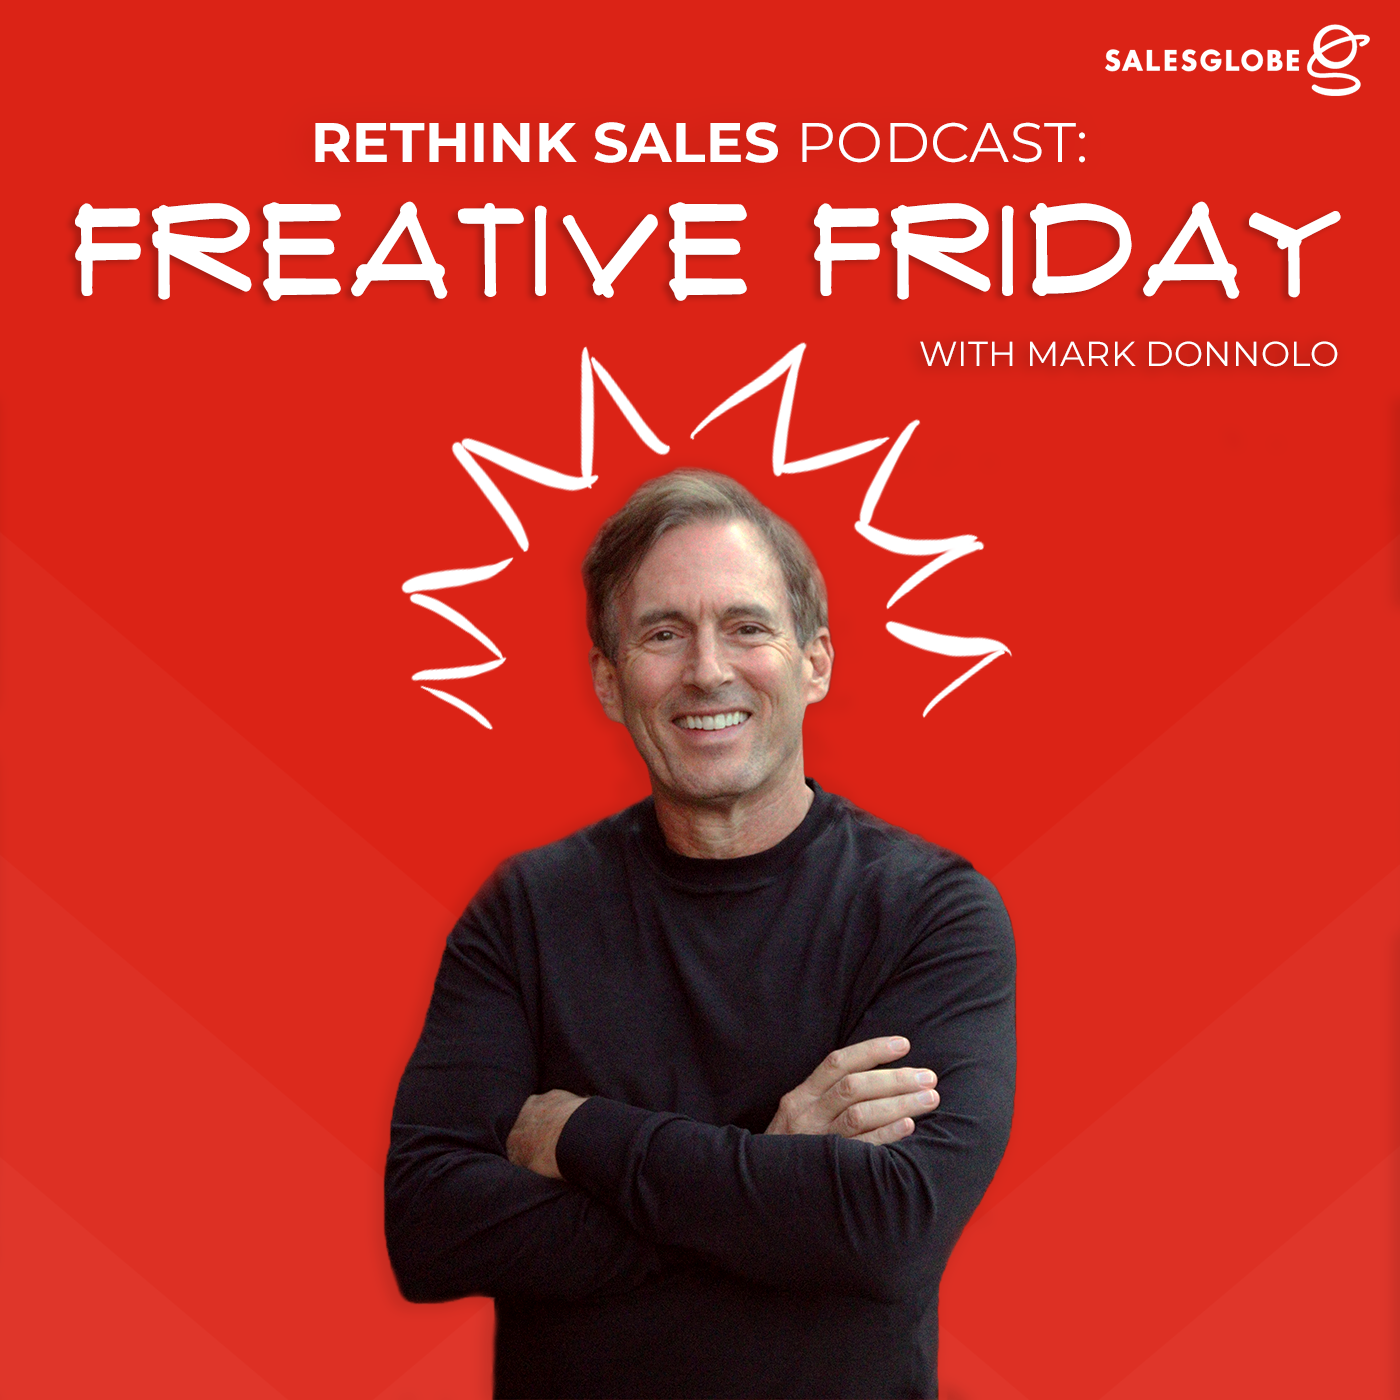 73: Freative Friday - Storytelling for Strategic Accounts: Engaging our Primal Wiring